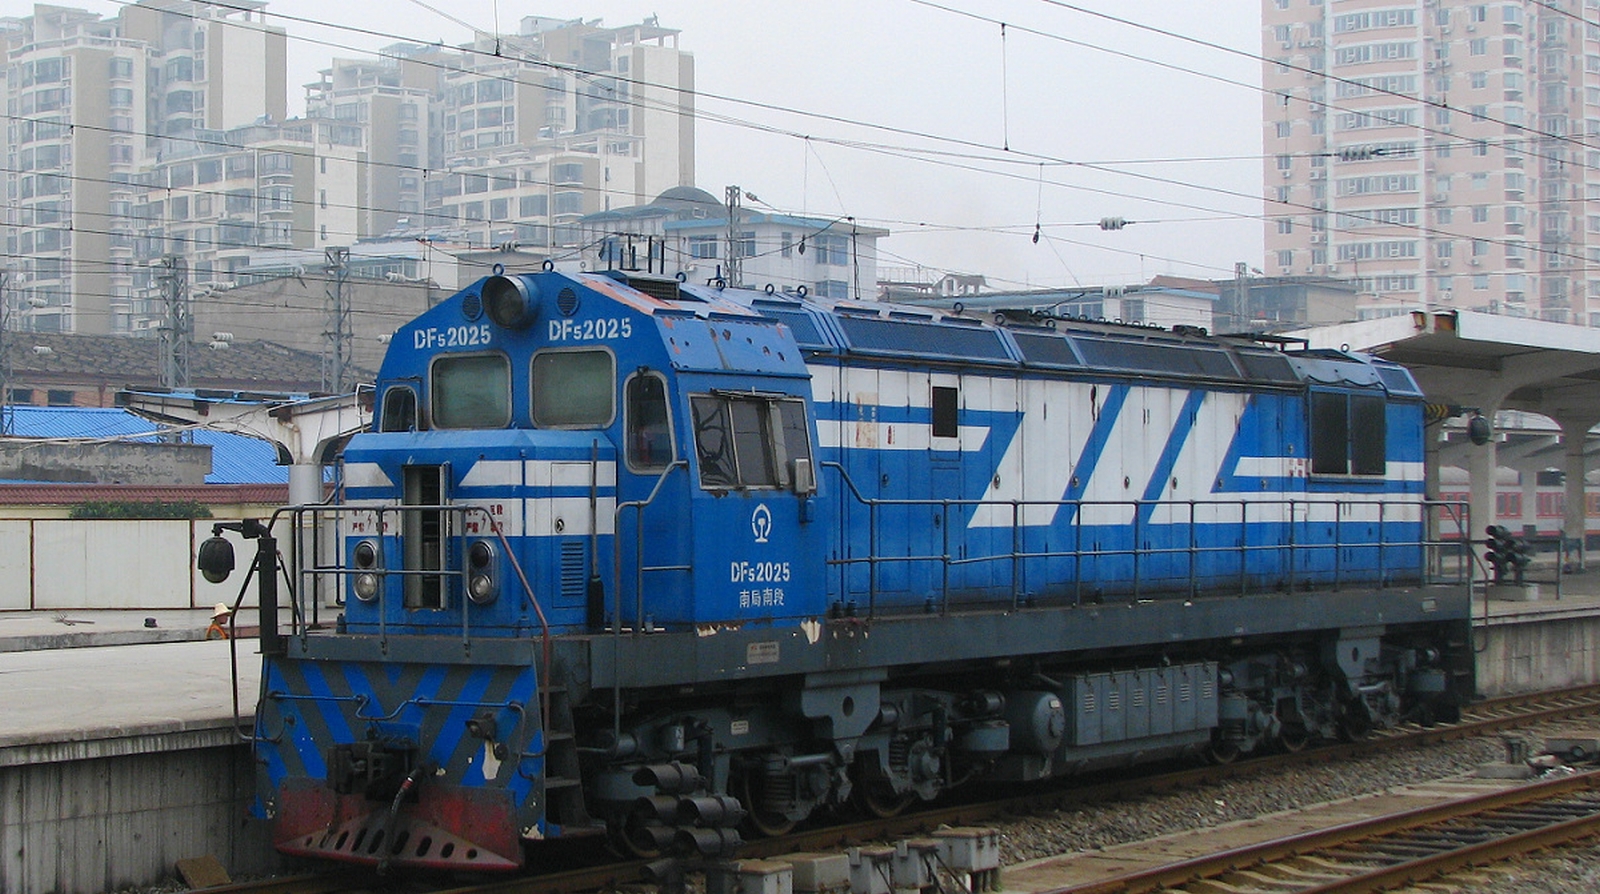 Third Generation from Sifang in June 2010 in Nanchang